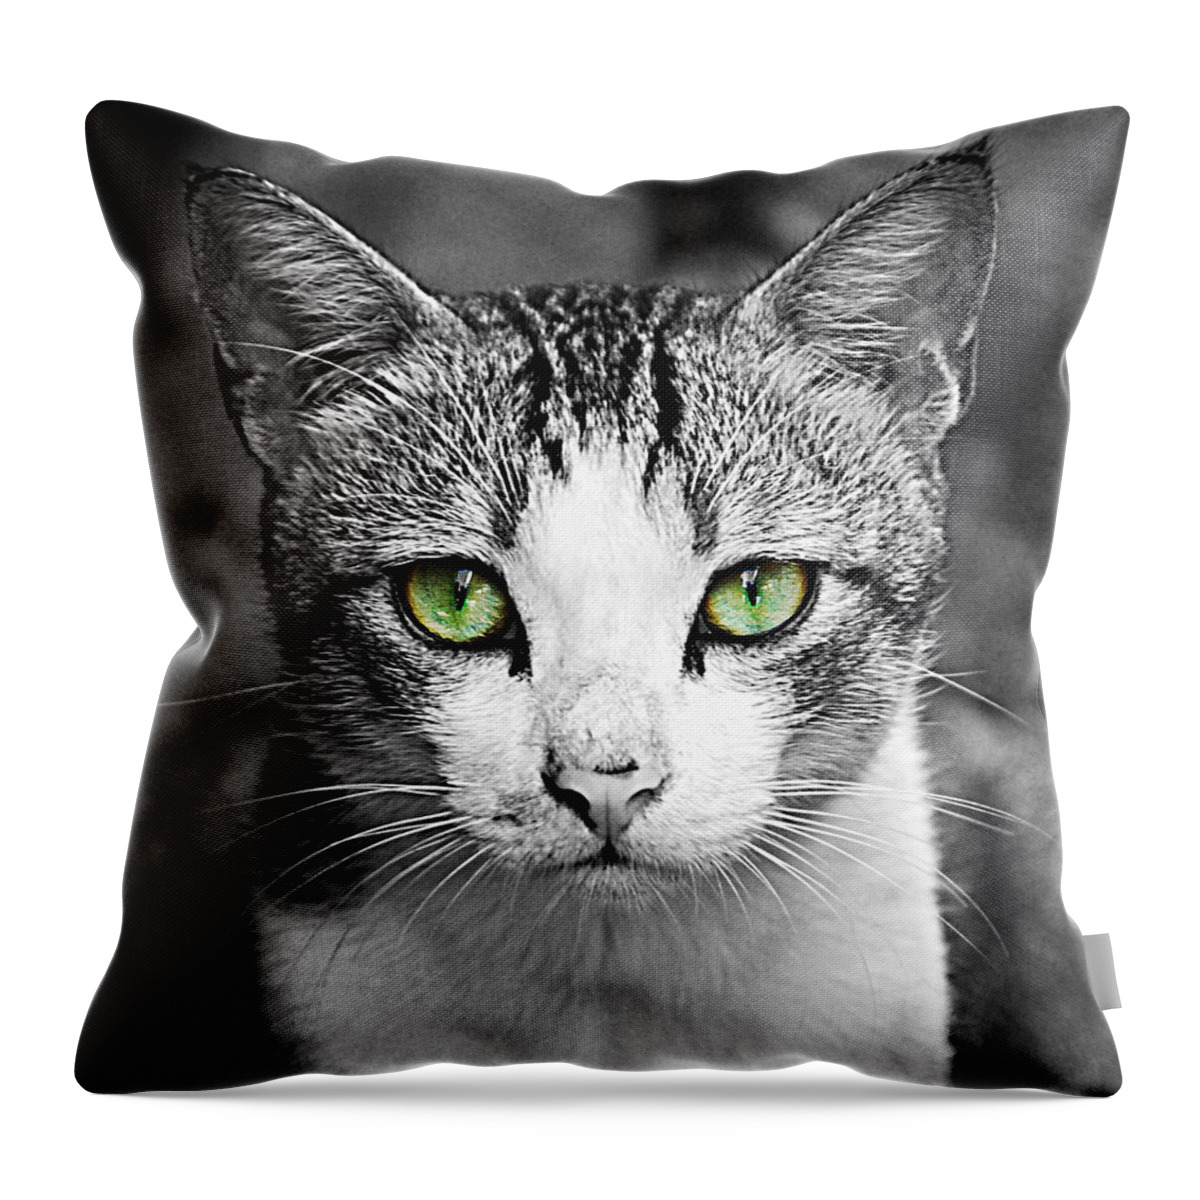 Cat Throw Pillow featuring the photograph Cat by Joe Banx